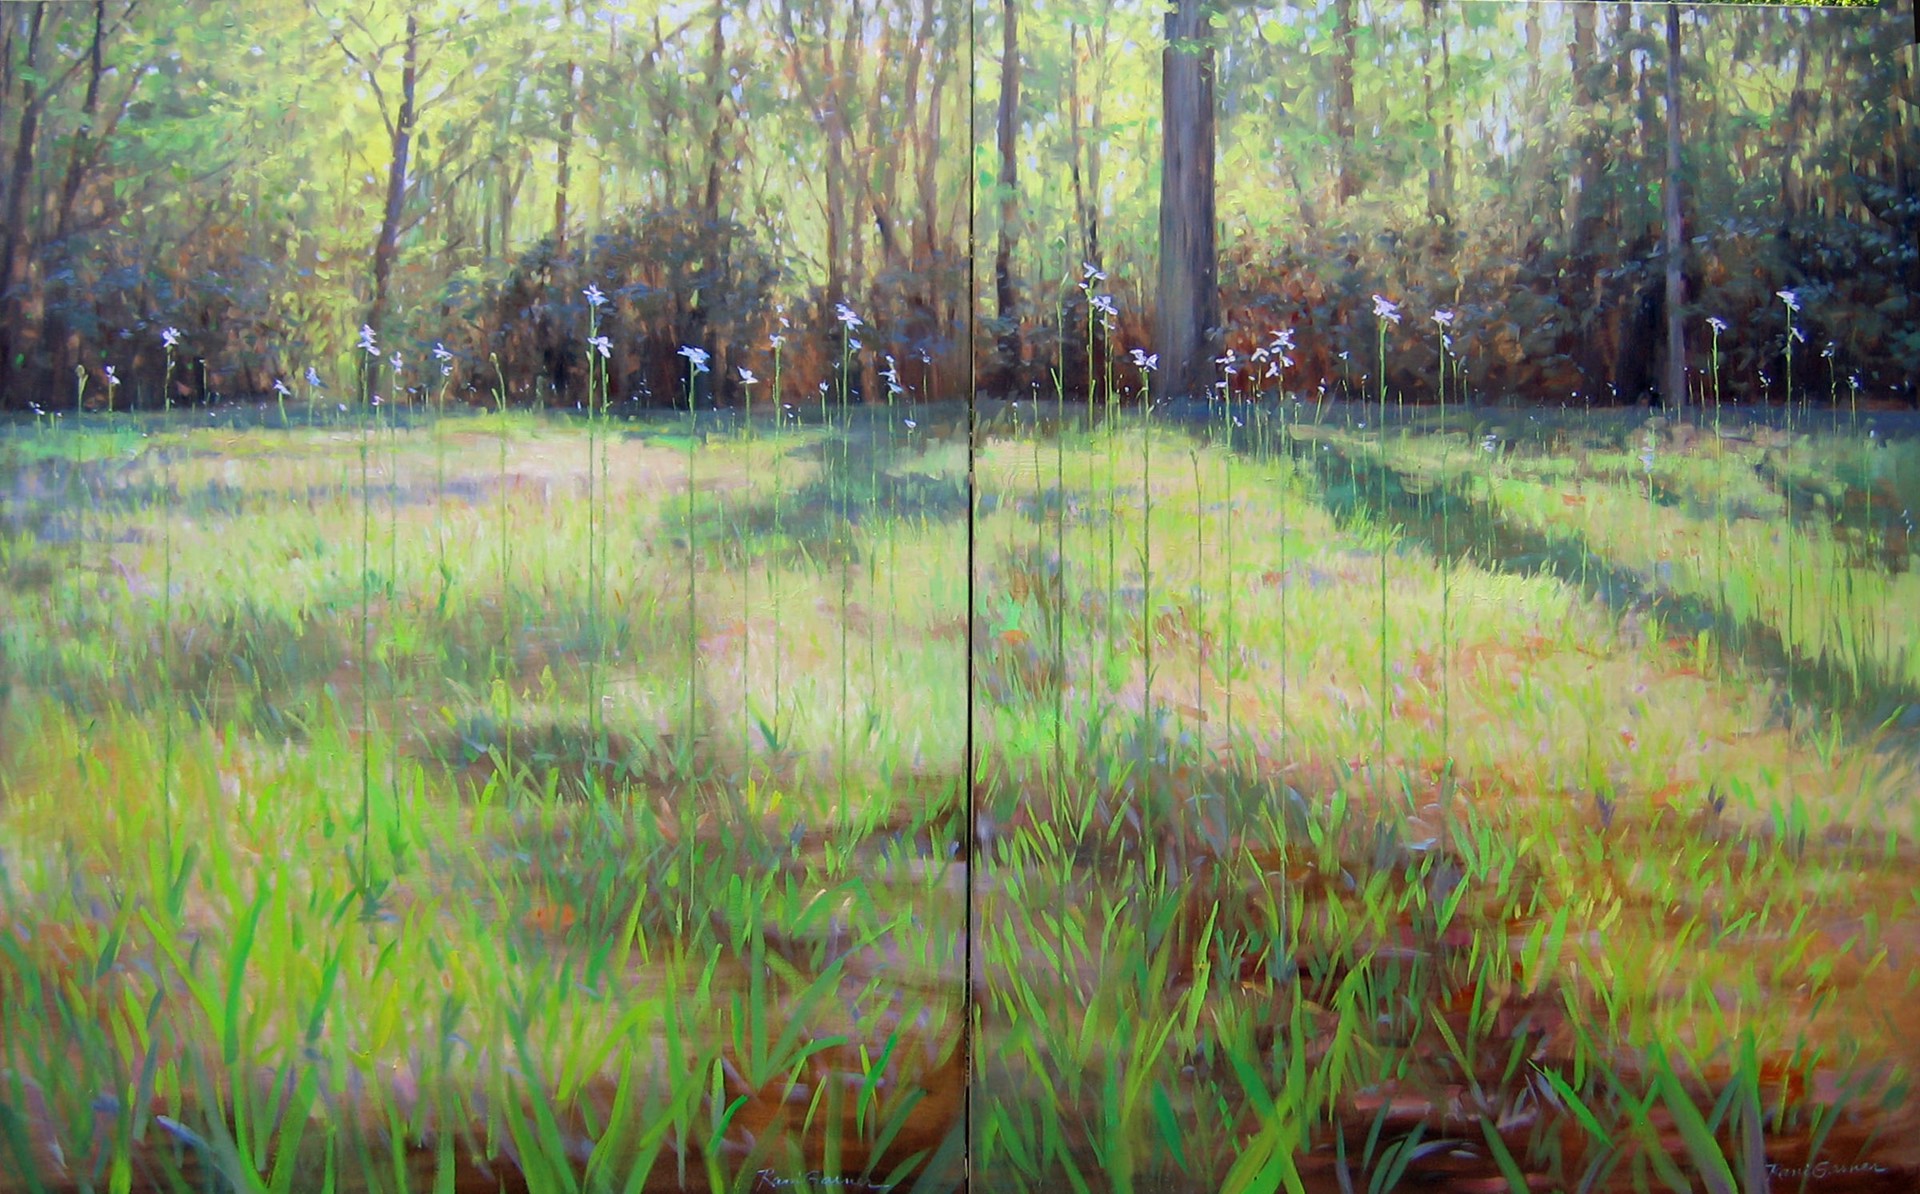 Signature Leaves of Grass Diptych- by Rani Garner